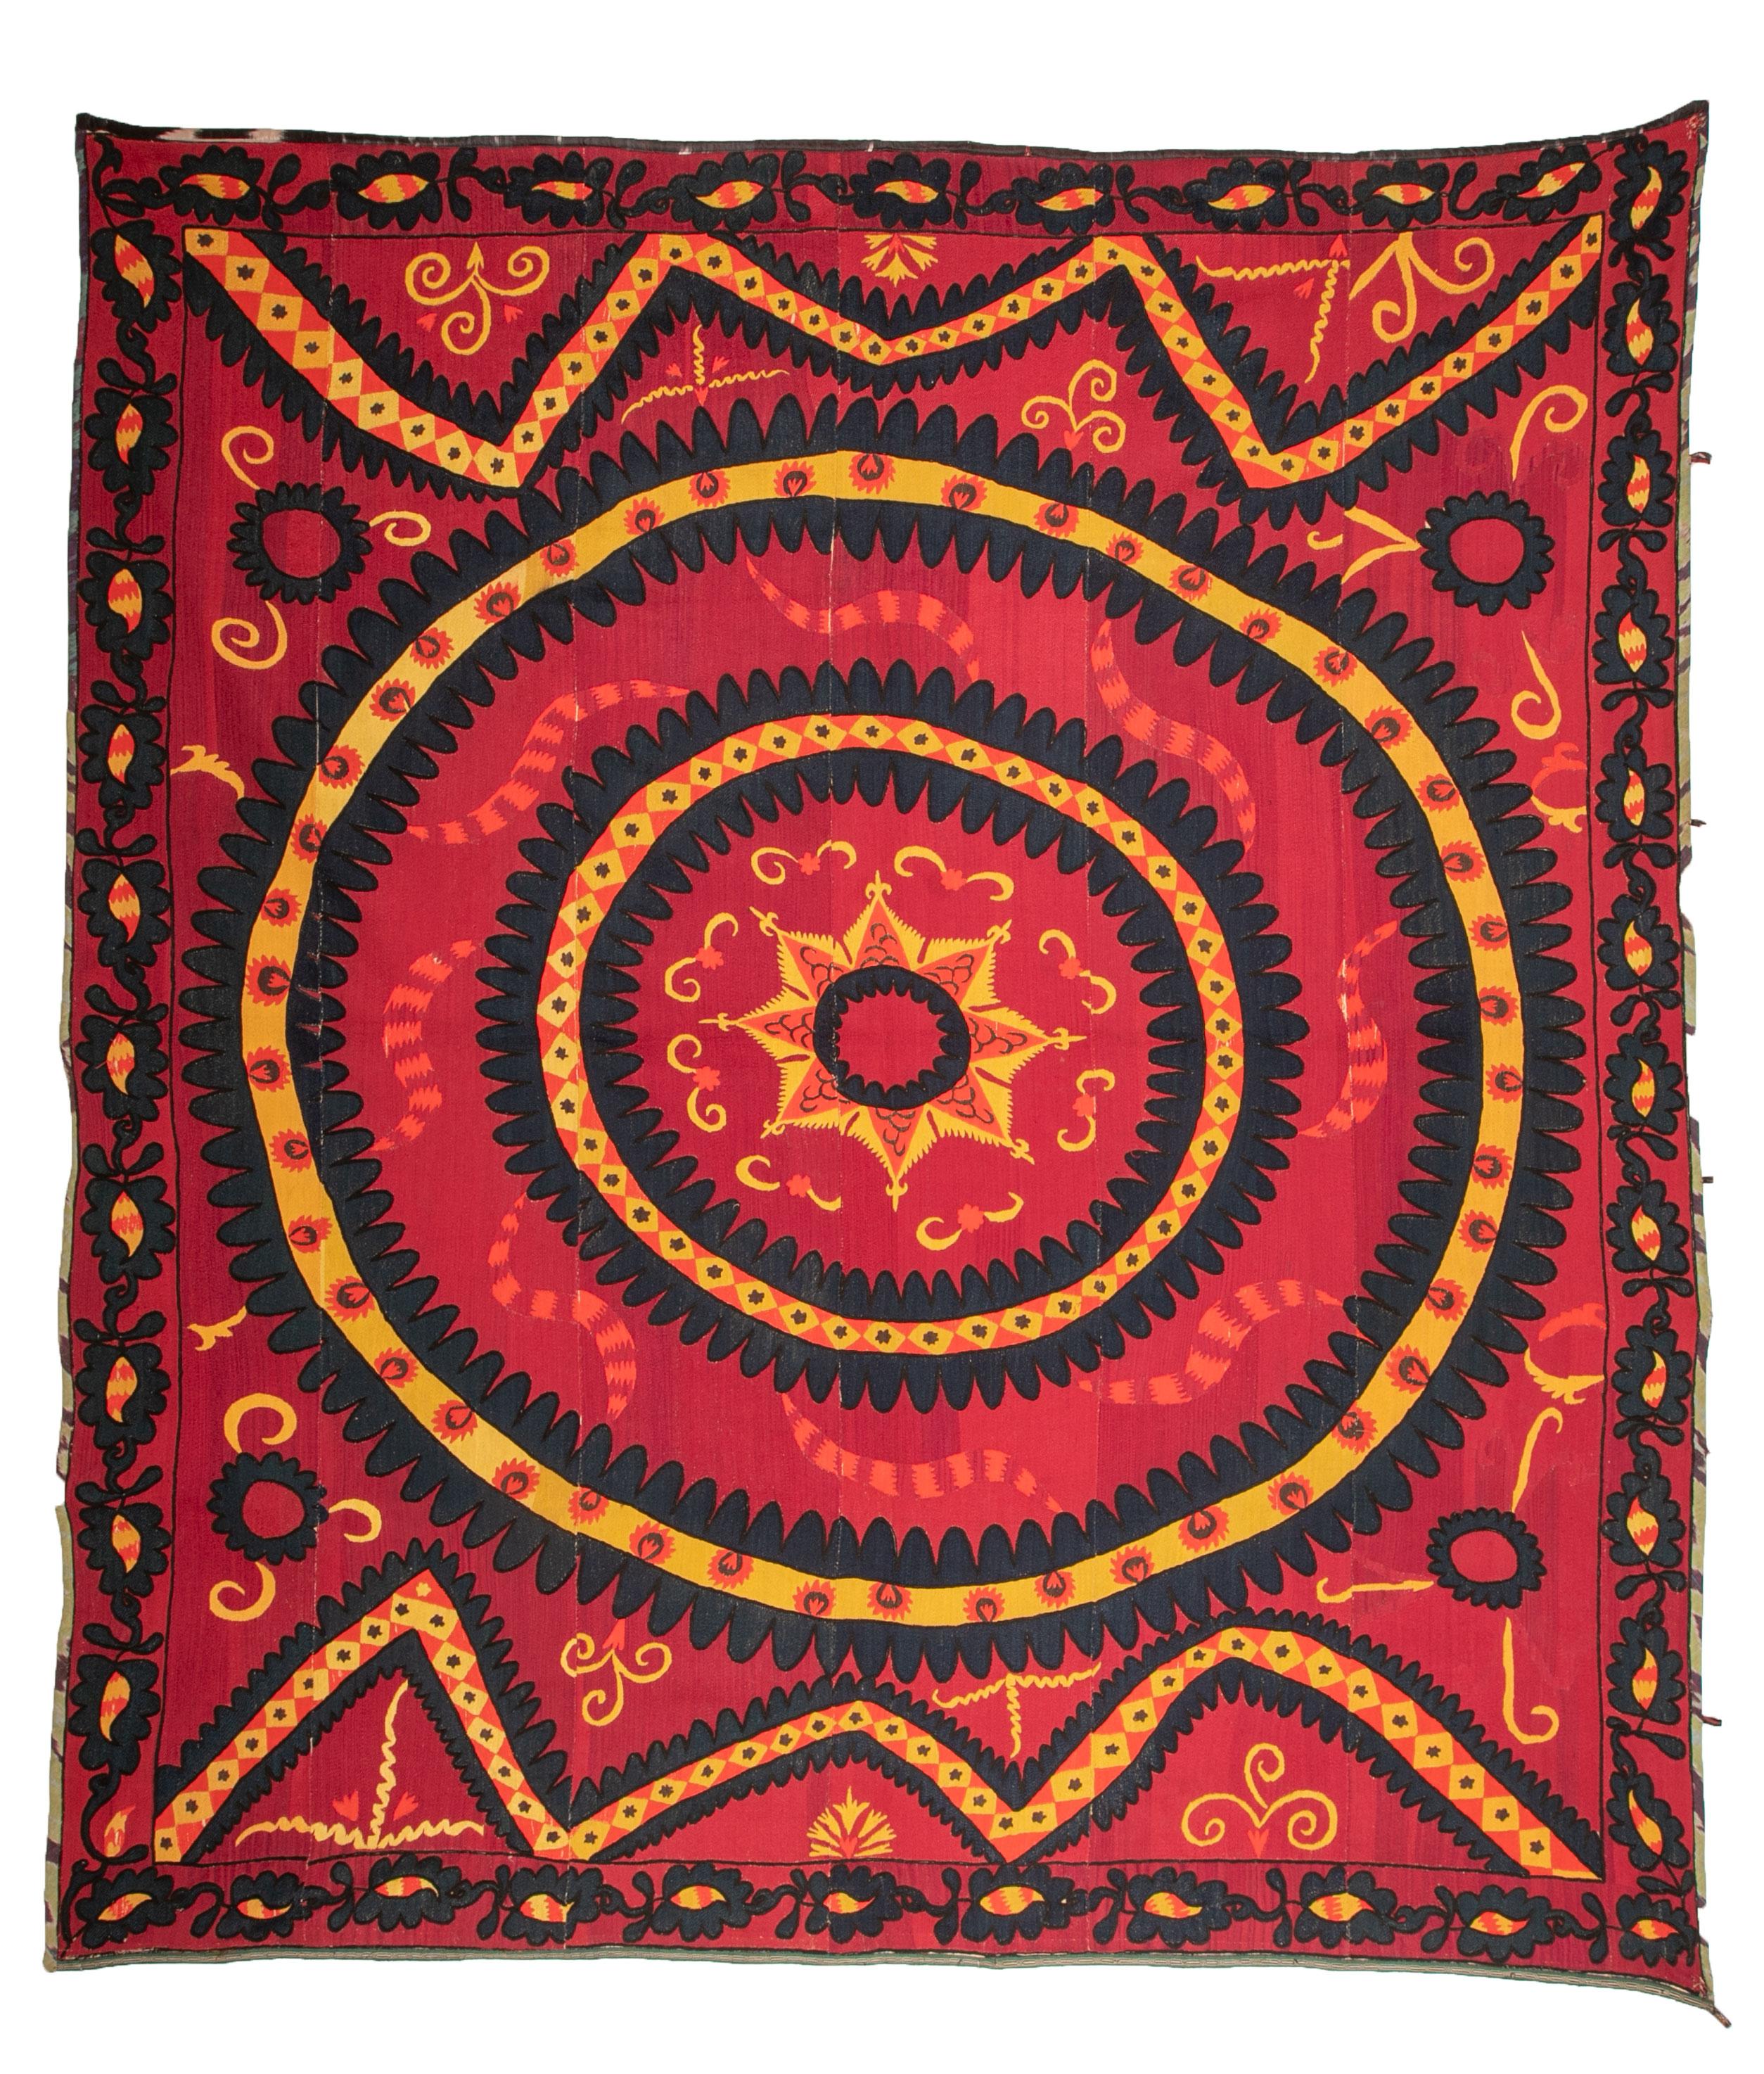 Suzanis from the regions of Tashkent and Pishkent have some astral names such az ‘moon sky’,
‘Star Sky ‘. The main characteristic of these suzanis is that of their being fully embroidered in silk and sometimes in wool in sections.
Ground cloth is